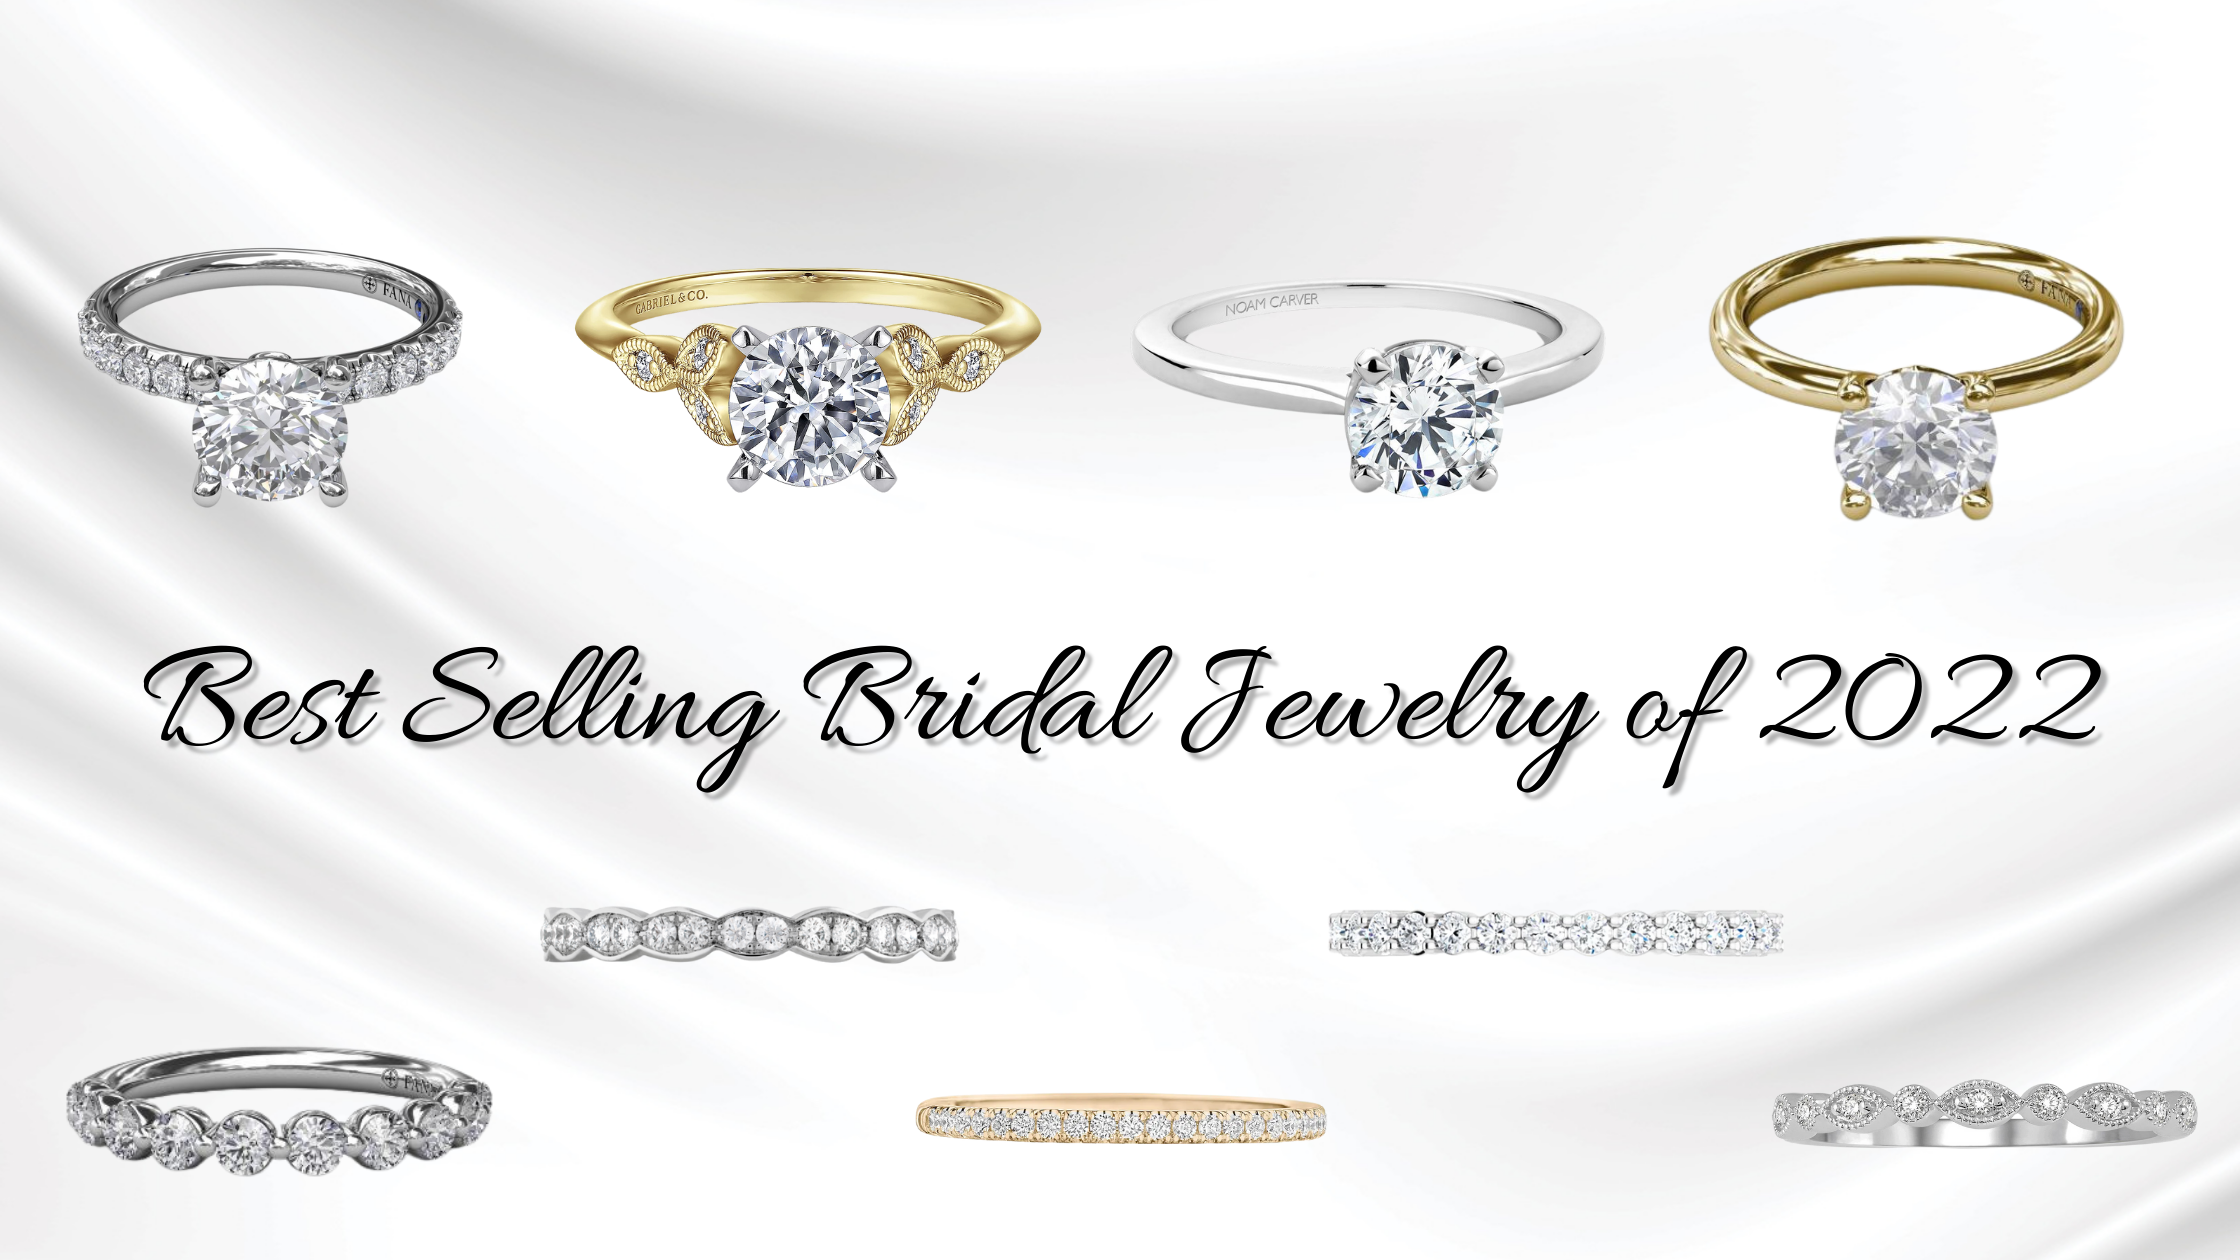 Best Selling Bridal Jewelry of 2022